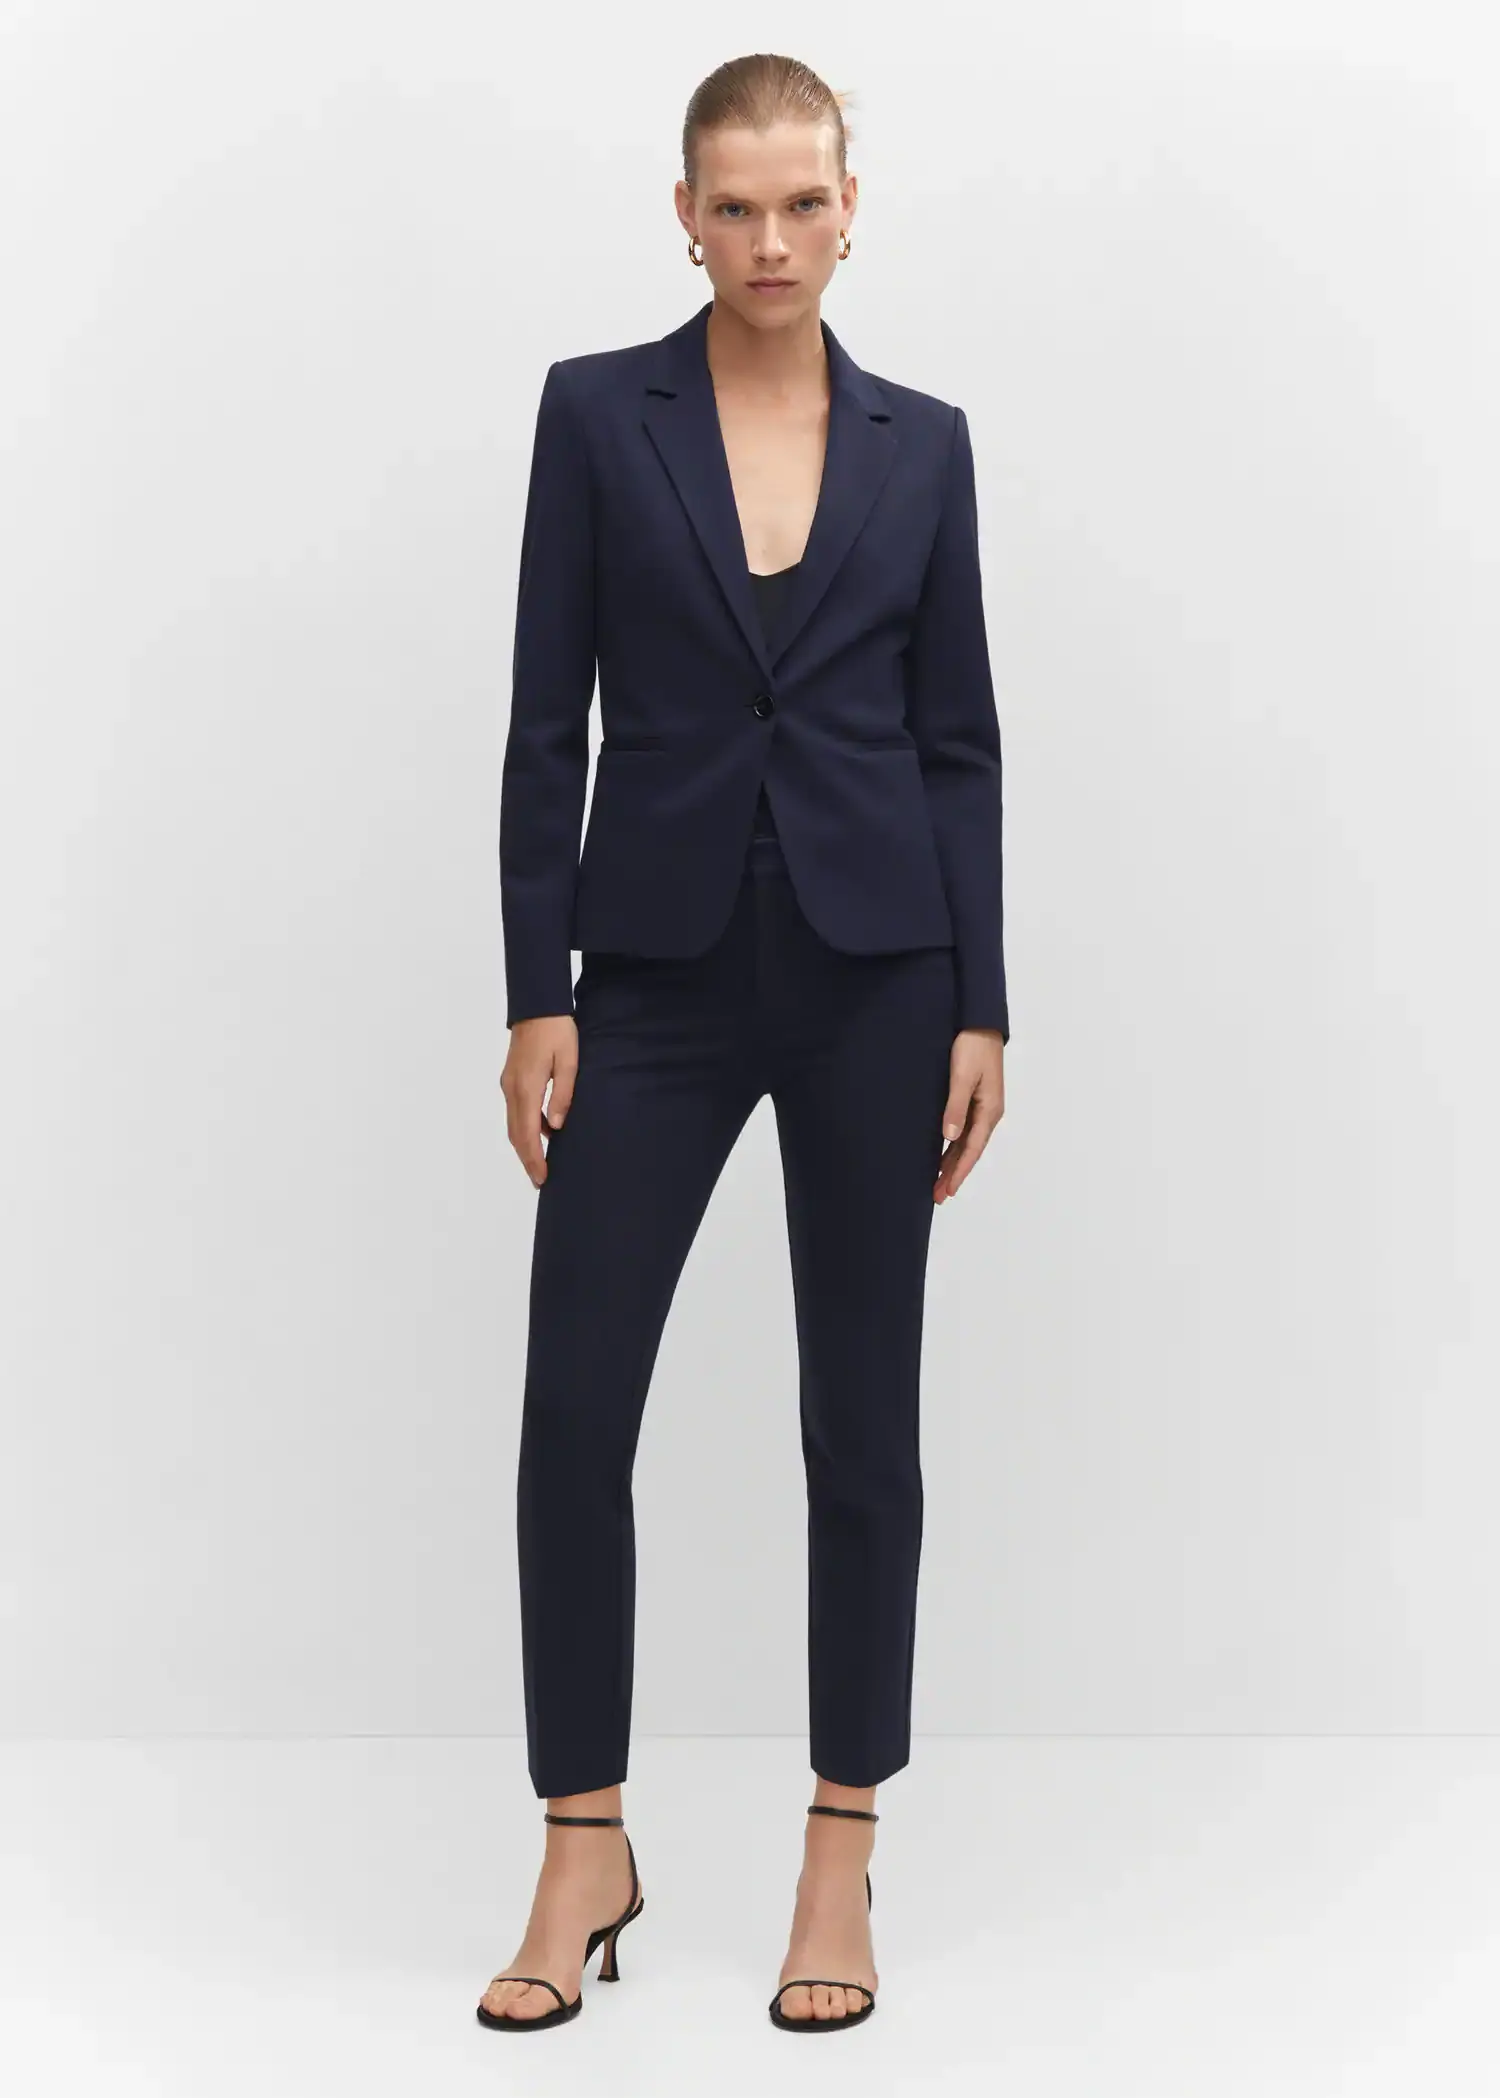 Mango Rome-knit straight pants. a woman wearing a suit standing in front of a white wall. 